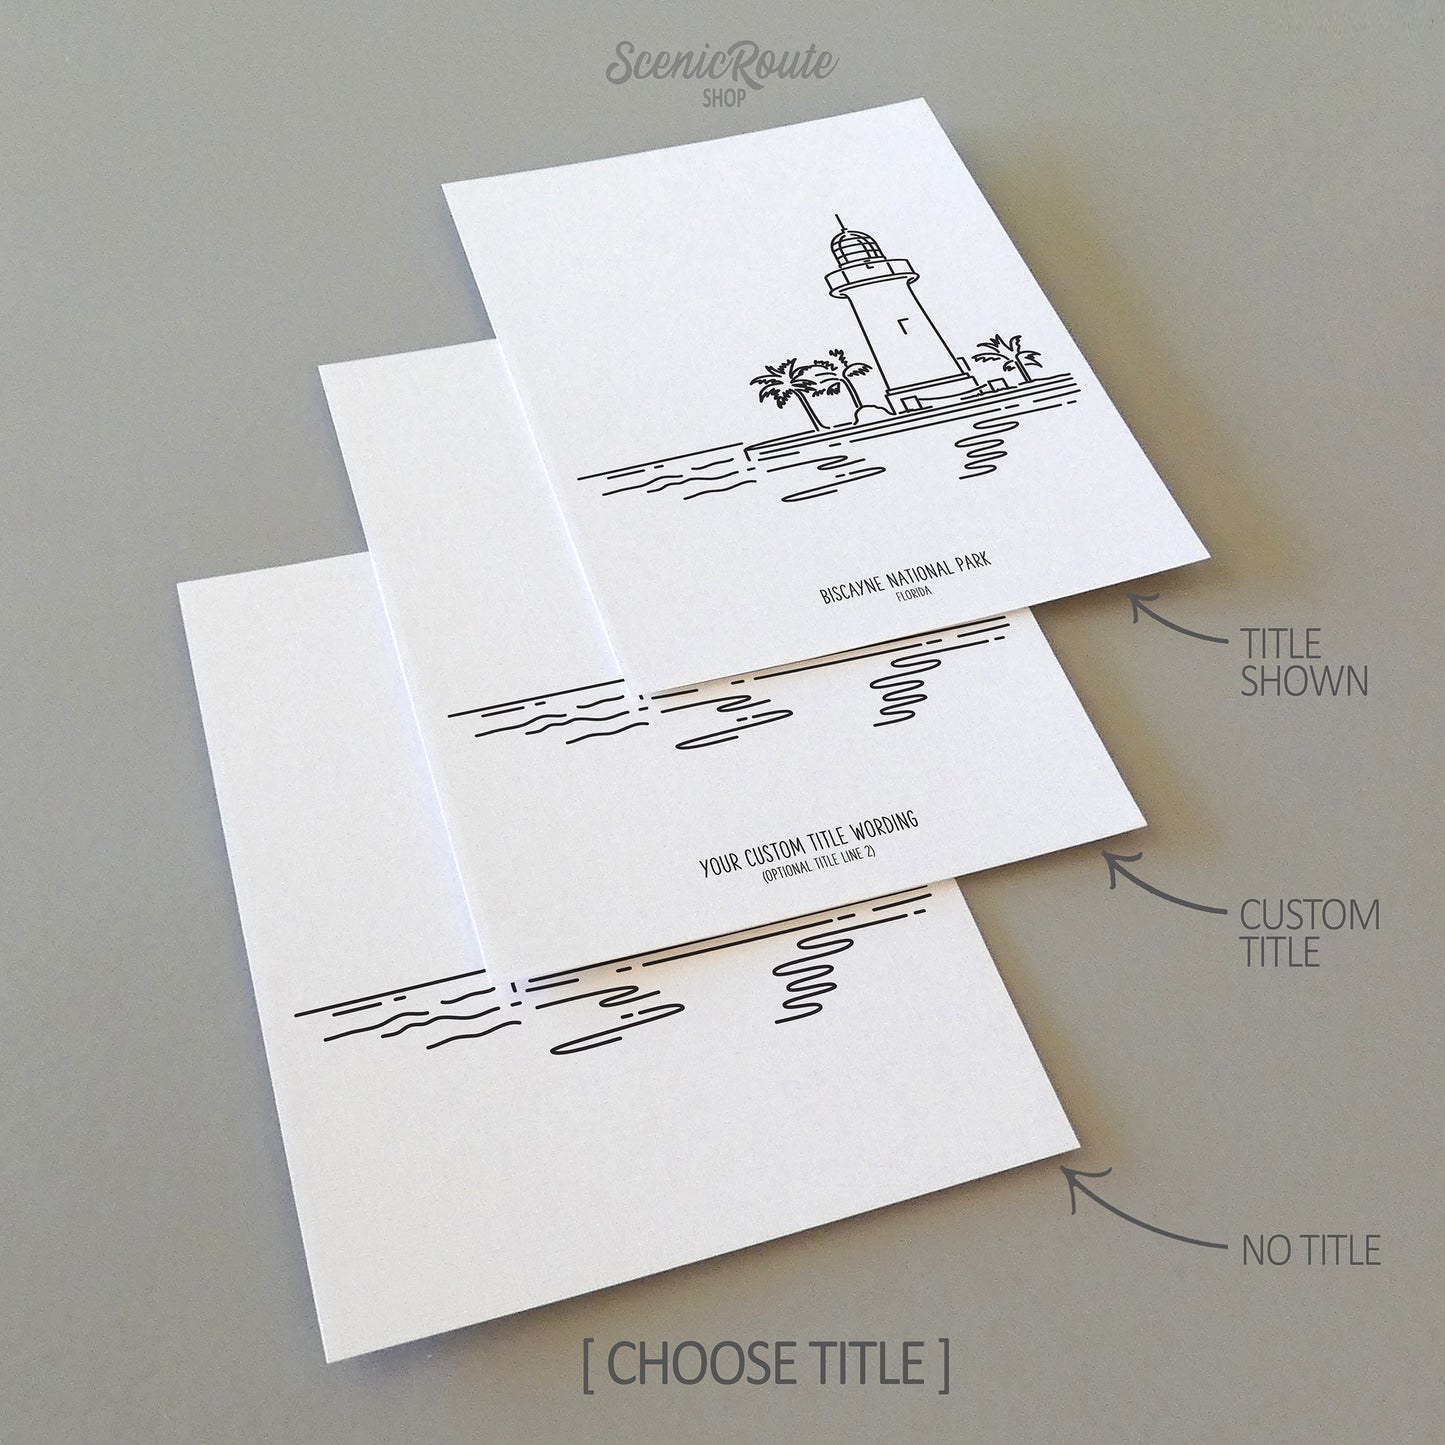 Three line art drawings of Biscayne National Park on white linen paper with a gray background. The pieces are shown with title options that can be chosen and personalized.